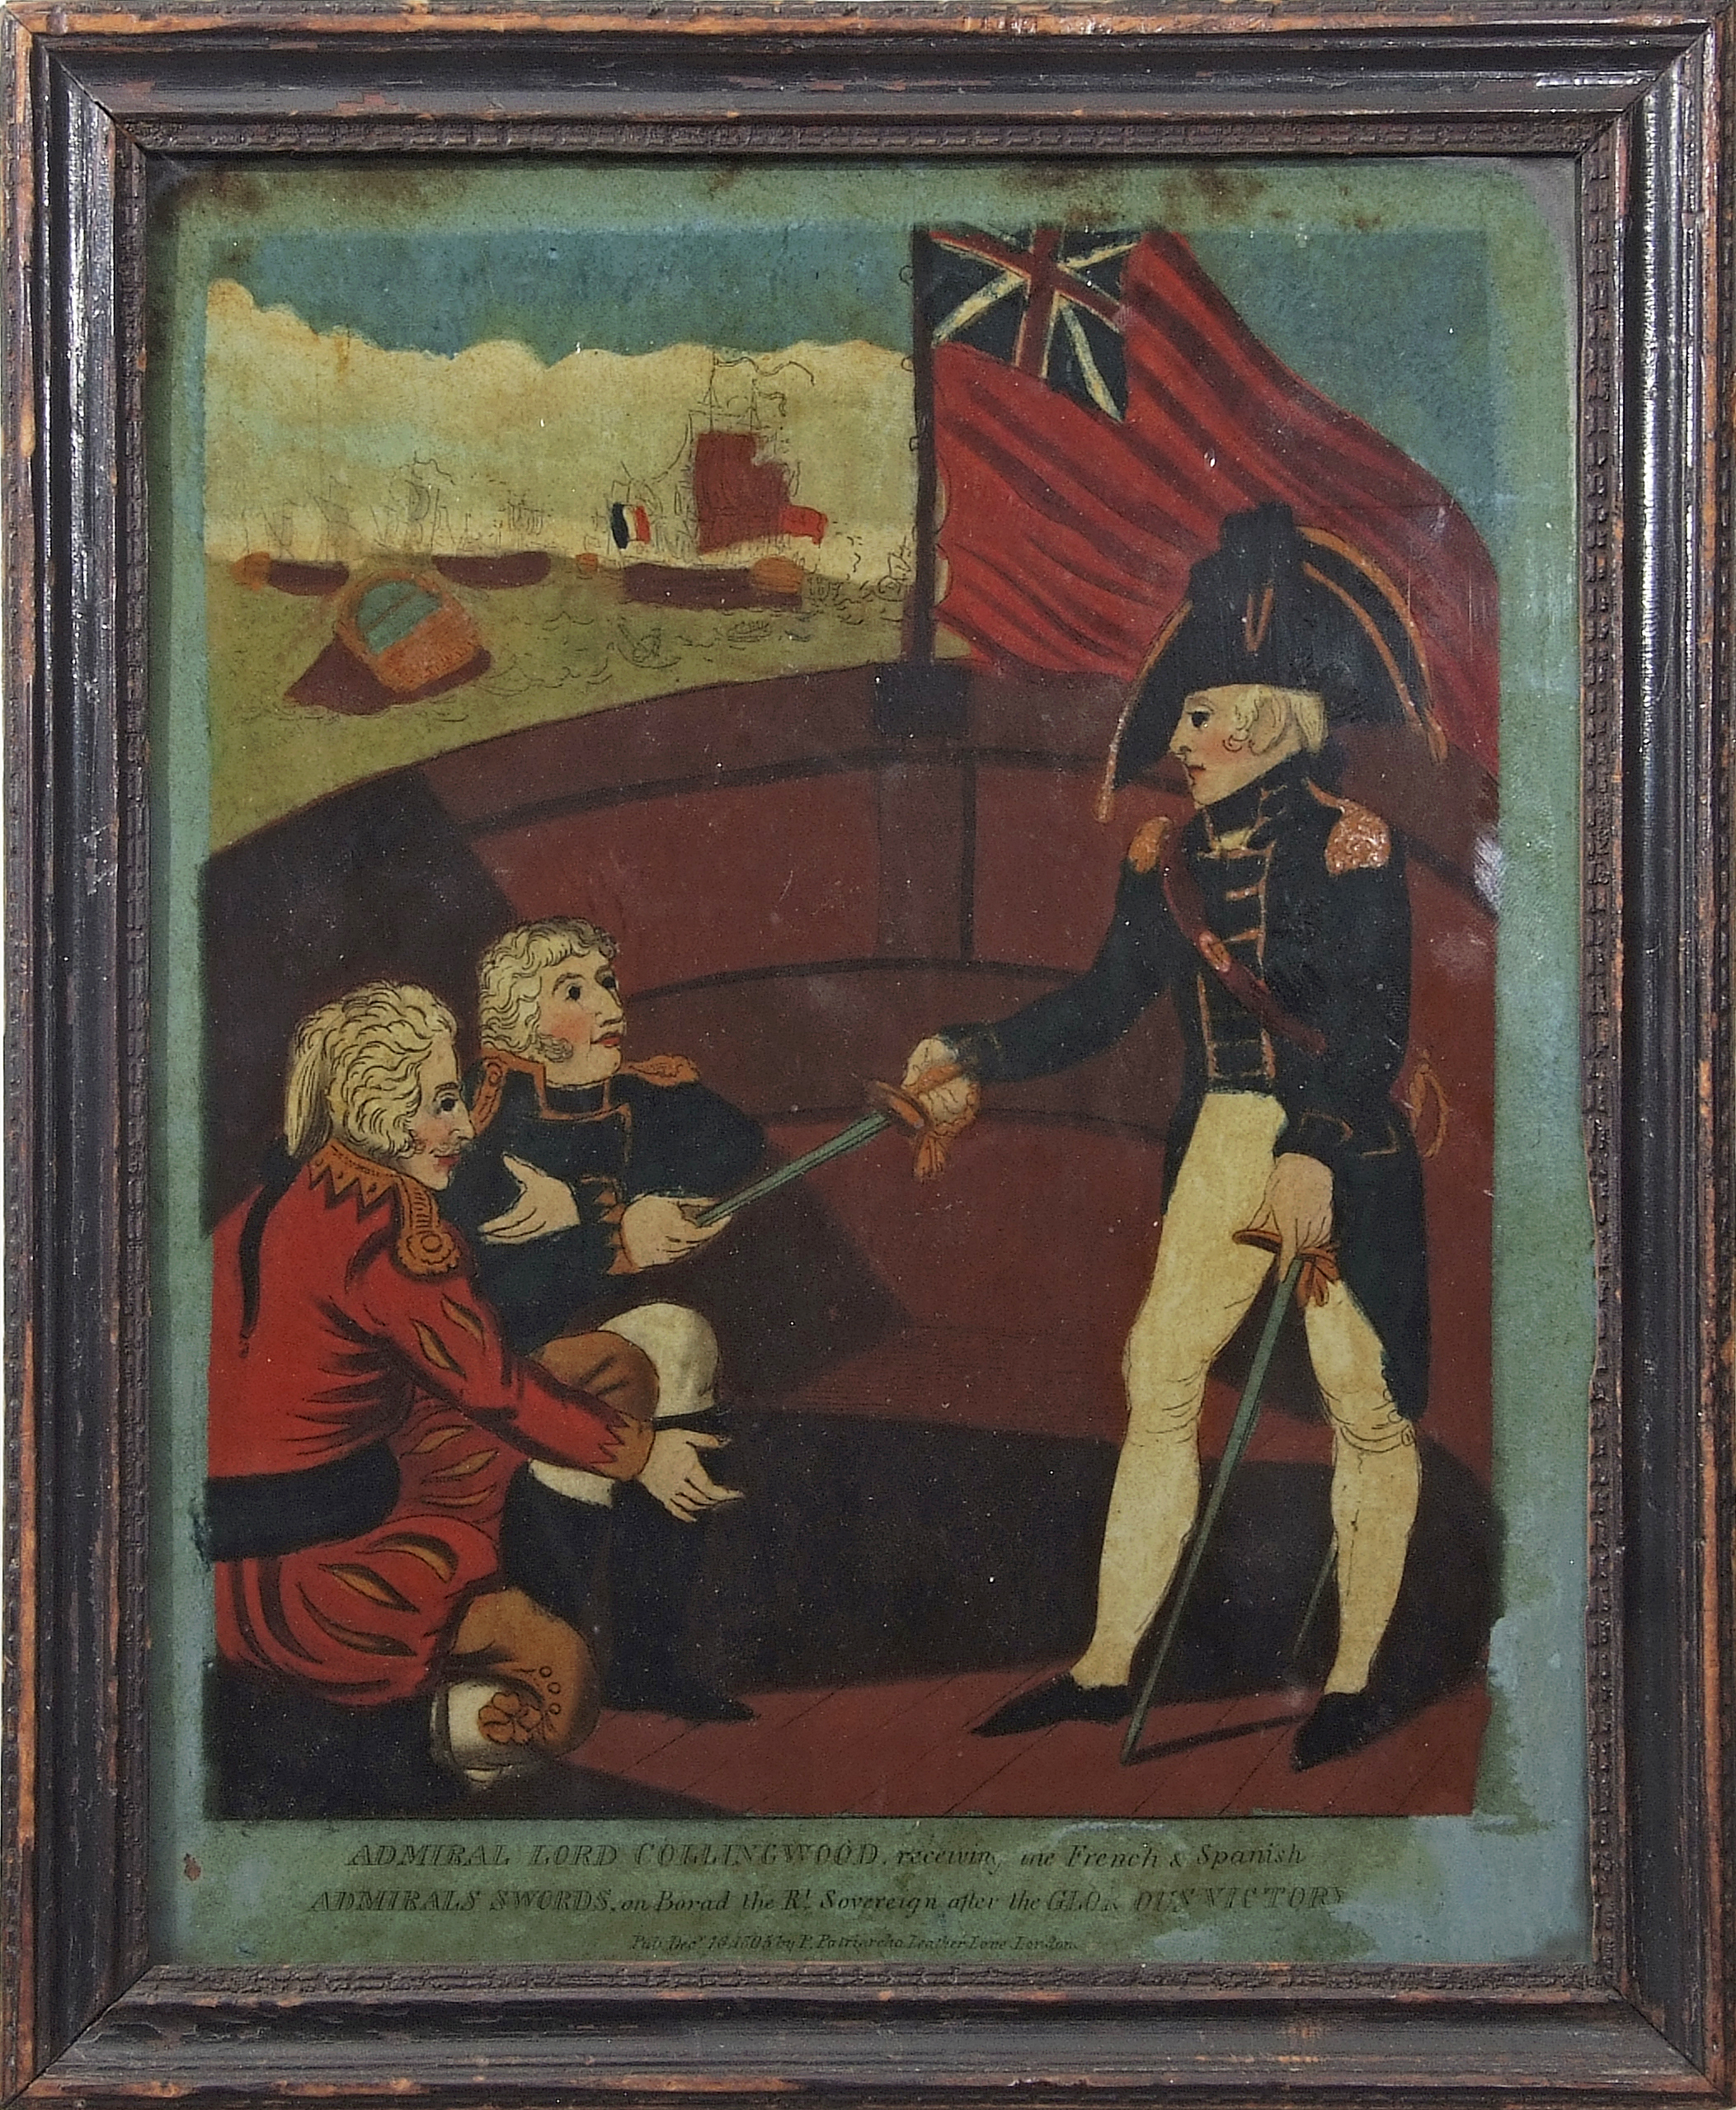 English School (19th century), "Britannia lamenting the death of Admiral Lord Nelson", reverse - Image 2 of 2